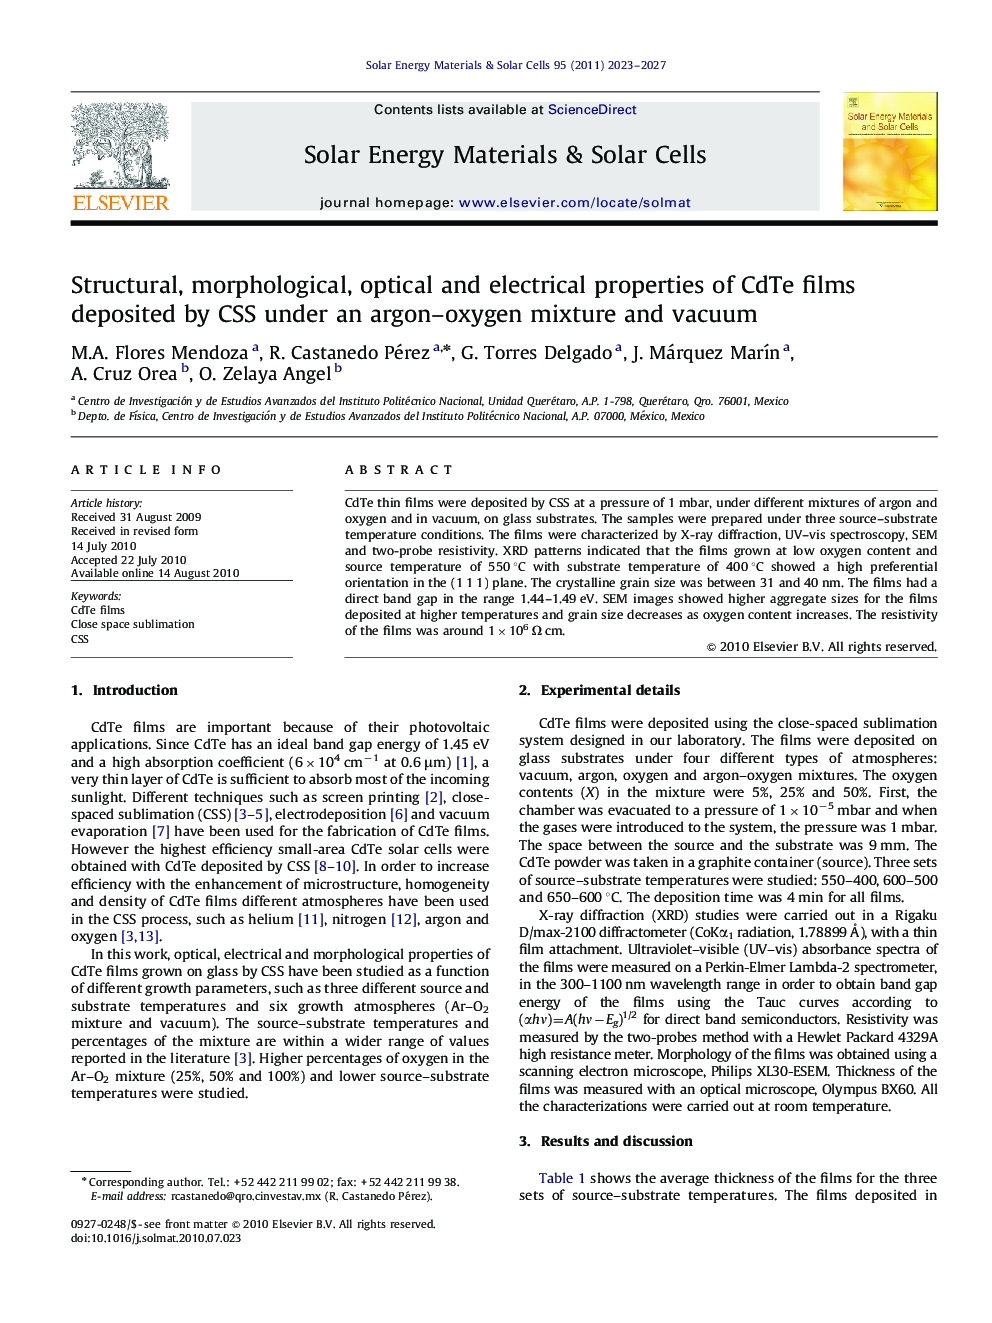 Structural, morphological, optical and electrical properties of CdTe films deposited by CSS under an argon–oxygen mixture and vacuum